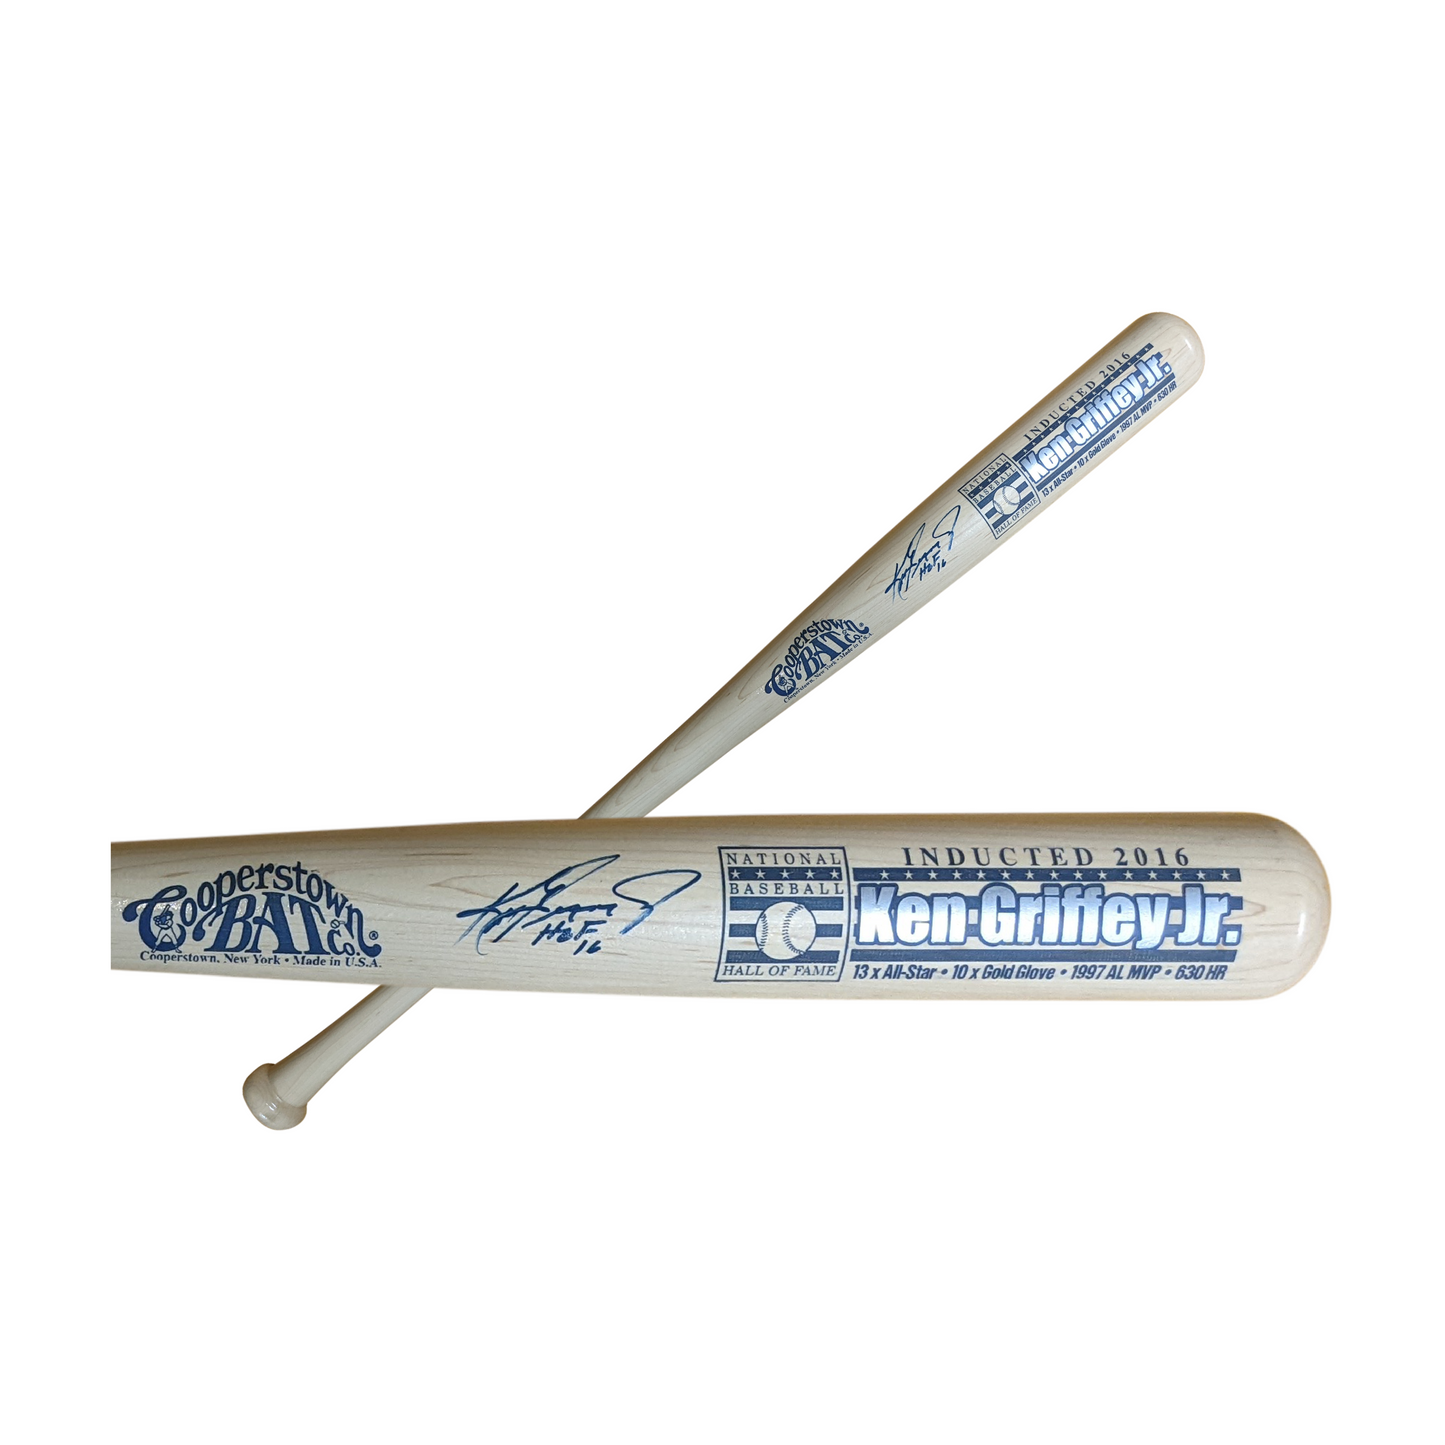 Ken Griffey Jr. Autographed Hand Signed Cooperstown Stats Wood Baseball Bat with HOF 16 Inscription - PSA Authentication